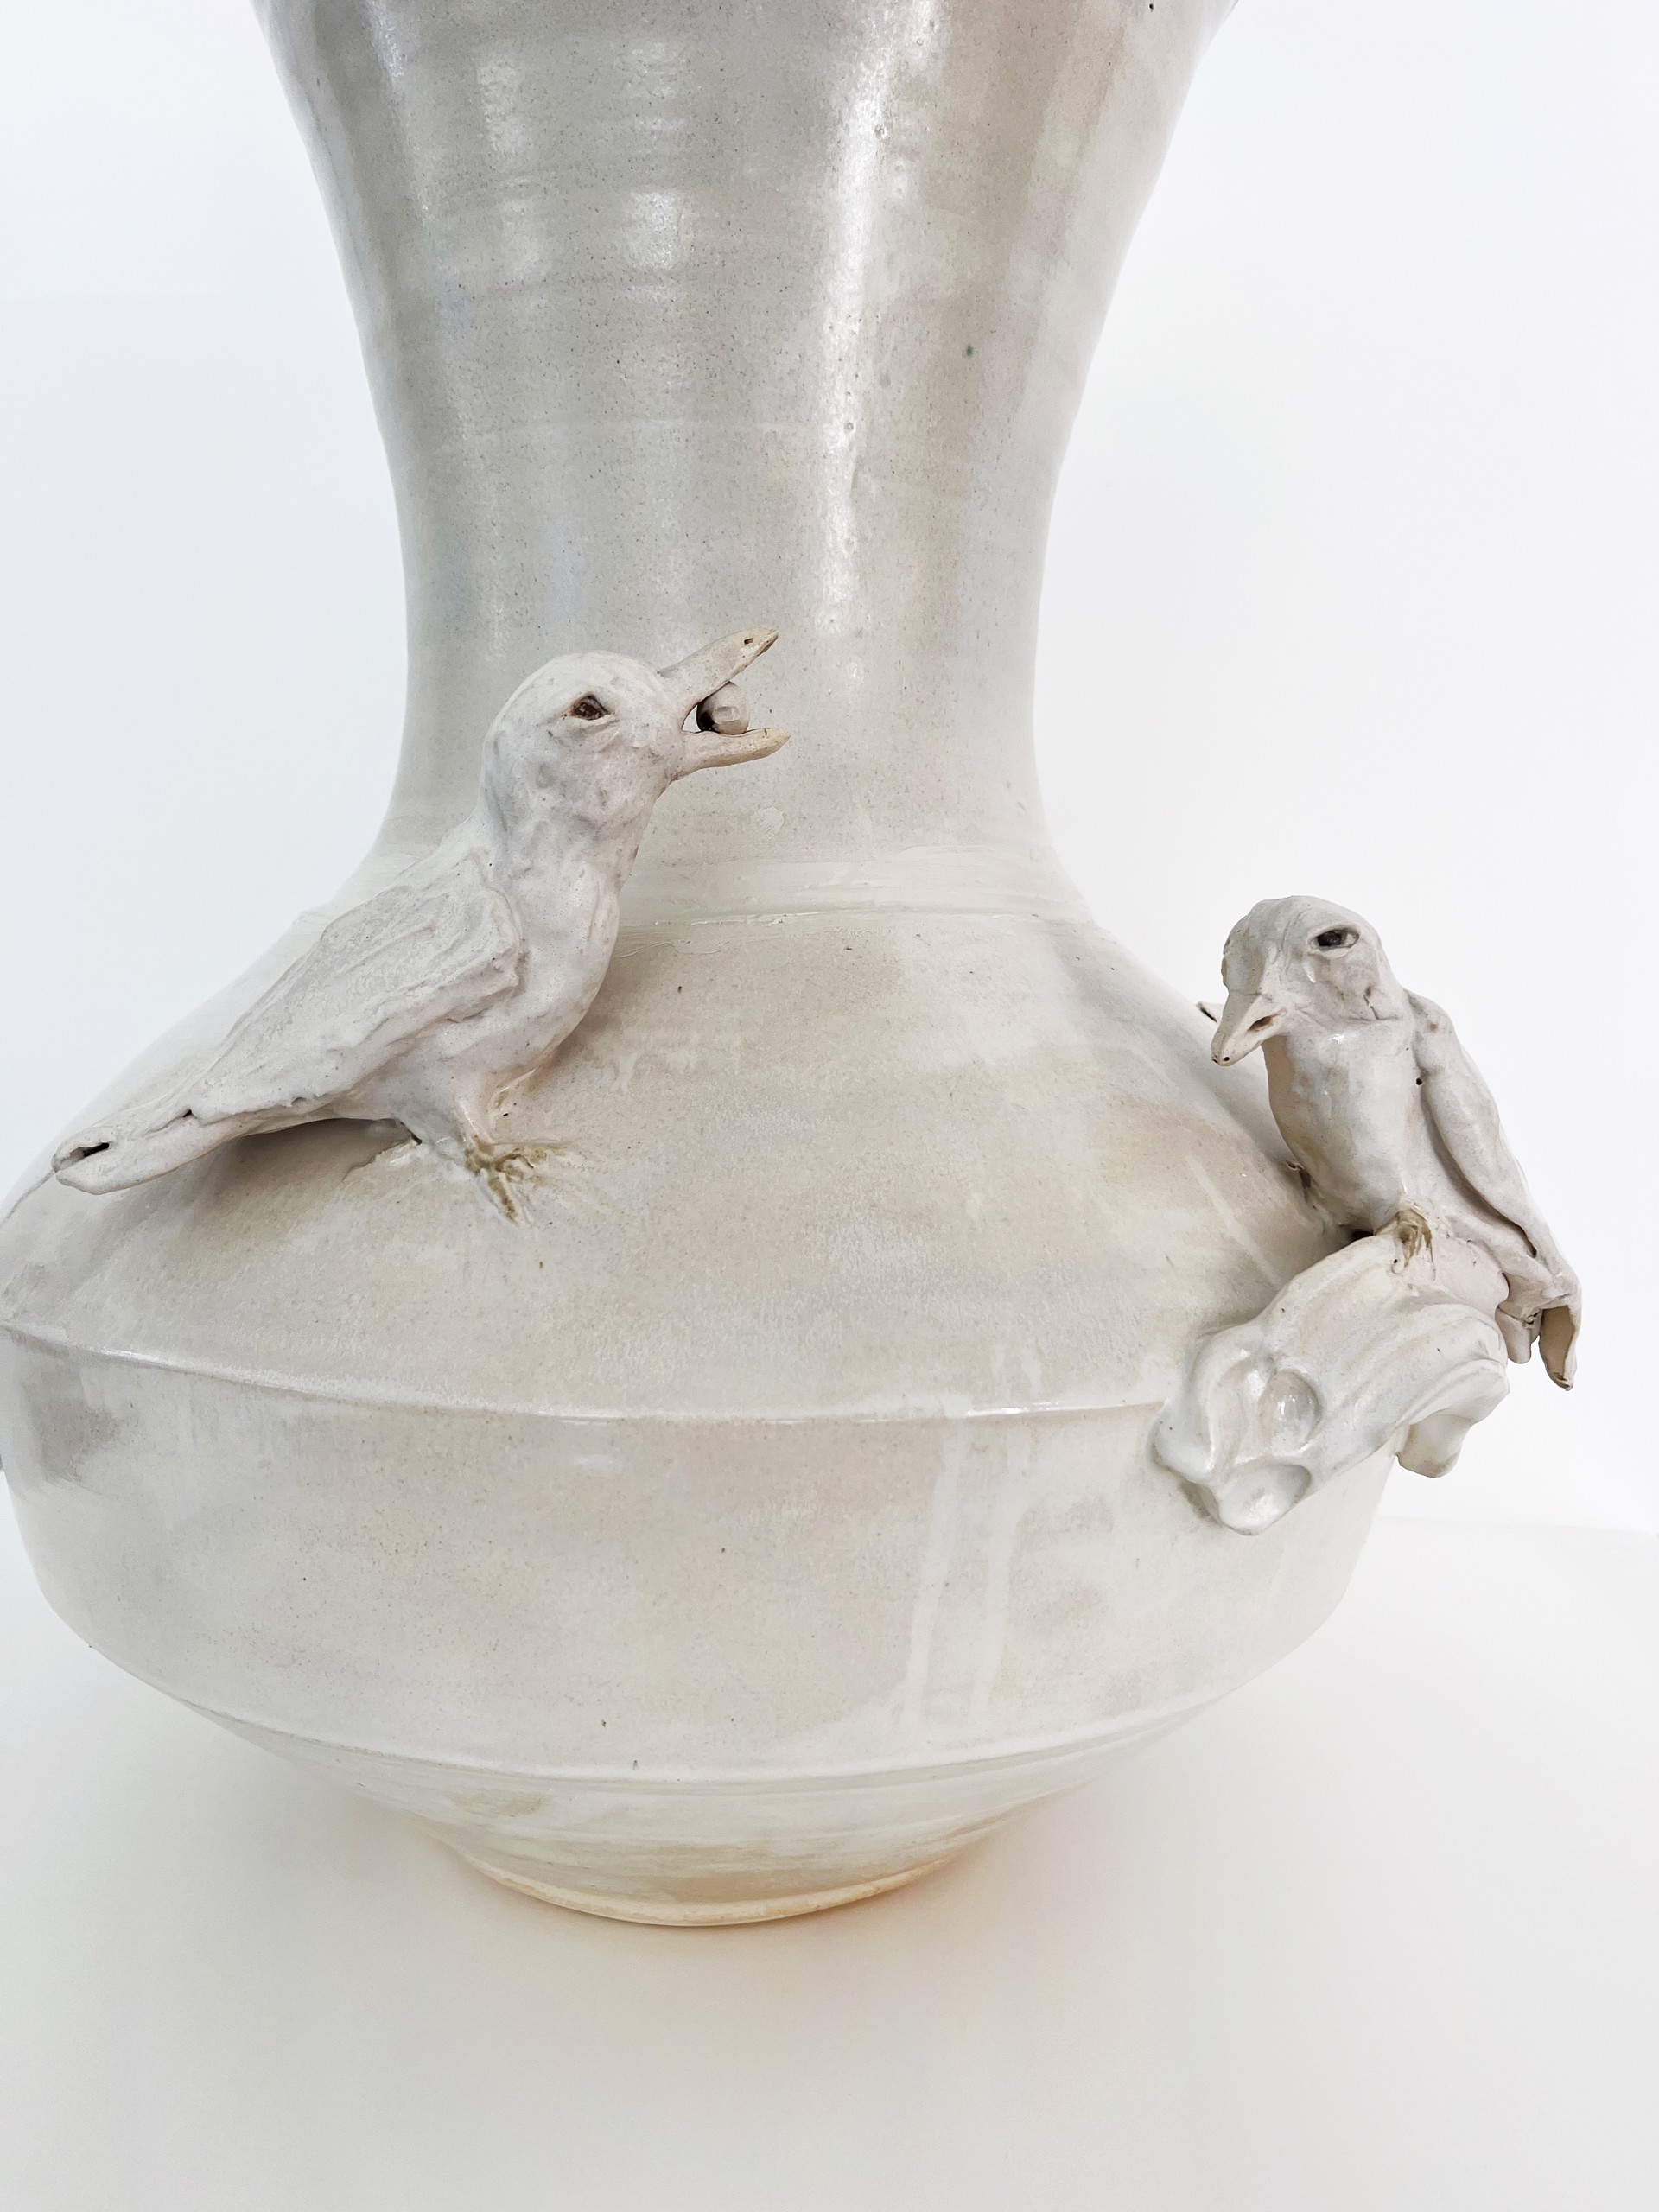 Vessel with Birds by J-D Schall